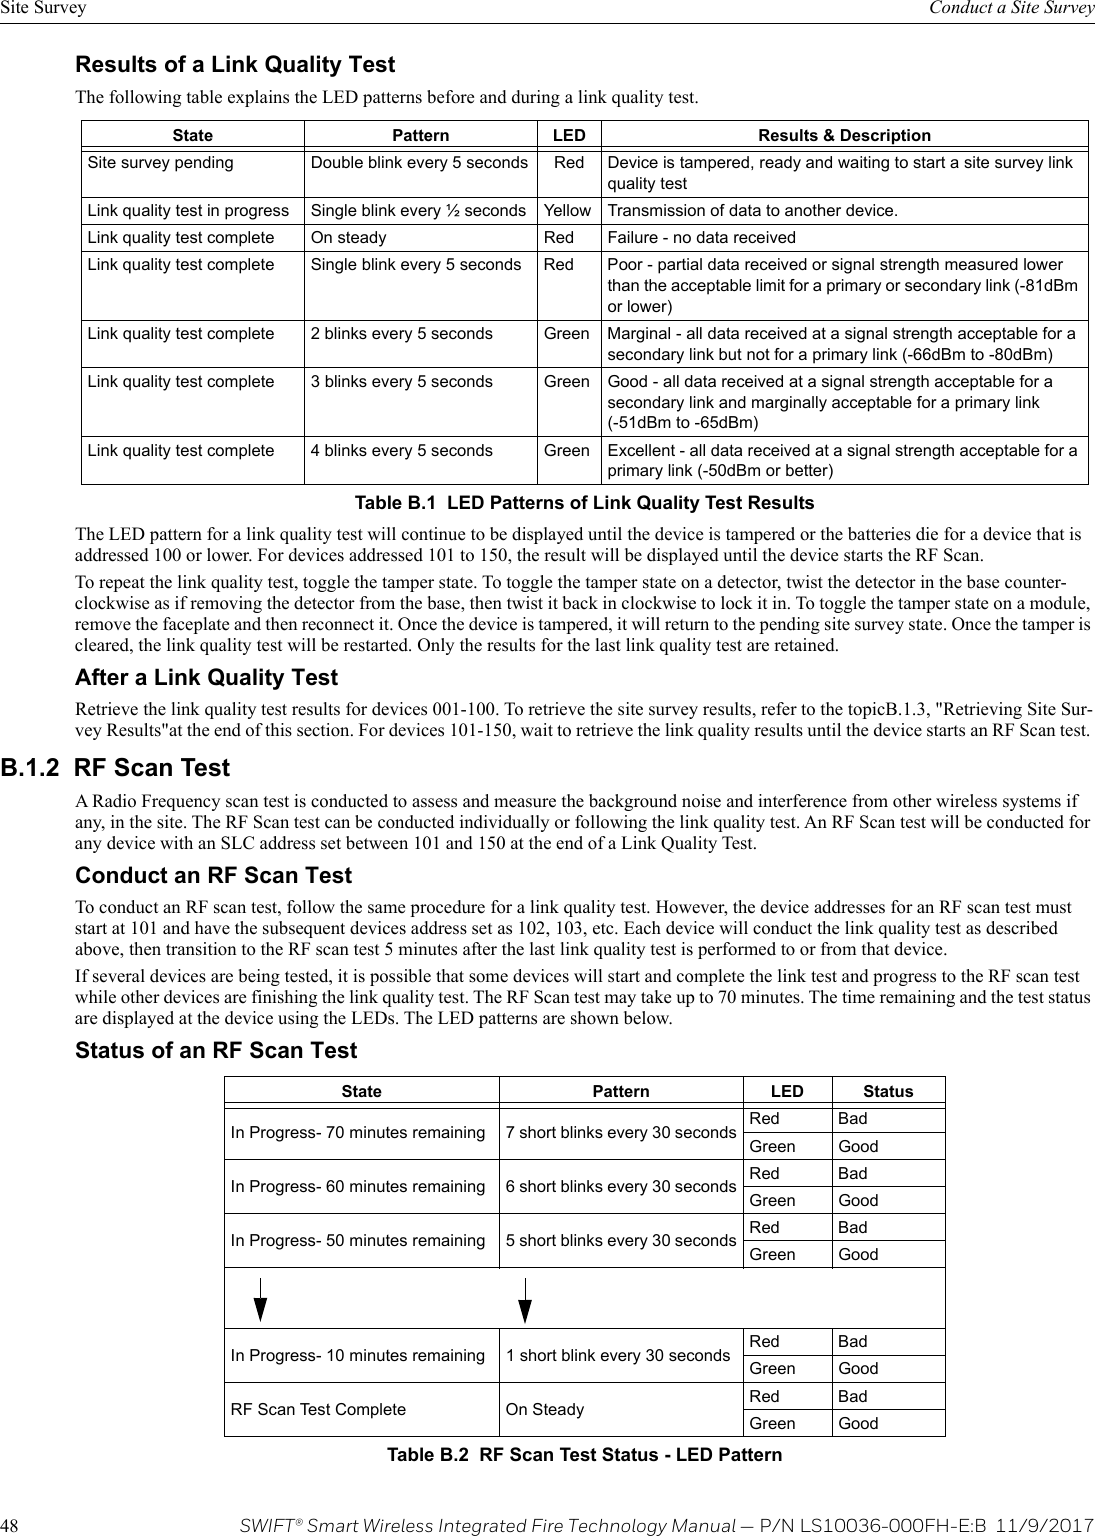 48 SWIFT® Smart Wireless Integrated Fire Technology Manual — P/N LS10036-000FH-E:B  11/9/2017Site Survey Conduct a Site SurveyResults of a Link Quality TestThe following table explains the LED patterns before and during a link quality test. The LED pattern for a link quality test will continue to be displayed until the device is tampered or the batteries die for a device that is addressed 100 or lower. For devices addressed 101 to 150, the result will be displayed until the device starts the RF Scan.To repeat the link quality test, toggle the tamper state. To toggle the tamper state on a detector, twist the detector in the base counter-clockwise as if removing the detector from the base, then twist it back in clockwise to lock it in. To toggle the tamper state on a module, remove the faceplate and then reconnect it. Once the device is tampered, it will return to the pending site survey state. Once the tamper is cleared, the link quality test will be restarted. Only the results for the last link quality test are retained. After a Link Quality TestRetrieve the link quality test results for devices 001-100. To retrieve the site survey results, refer to the topicB.1.3, &quot;Retrieving Site Sur-vey Results&quot;at the end of this section. For devices 101-150, wait to retrieve the link quality results until the device starts an RF Scan test. B.1.2  RF Scan TestA Radio Frequency scan test is conducted to assess and measure the background noise and interference from other wireless systems if any, in the site. The RF Scan test can be conducted individually or following the link quality test. An RF Scan test will be conducted for any device with an SLC address set between 101 and 150 at the end of a Link Quality Test.Conduct an RF Scan TestTo conduct an RF scan test, follow the same procedure for a link quality test. However, the device addresses for an RF scan test must start at 101 and have the subsequent devices address set as 102, 103, etc. Each device will conduct the link quality test as described above, then transition to the RF scan test 5 minutes after the last link quality test is performed to or from that device.If several devices are being tested, it is possible that some devices will start and complete the link test and progress to the RF scan test while other devices are finishing the link quality test. The RF Scan test may take up to 70 minutes. The time remaining and the test status are displayed at the device using the LEDs. The LED patterns are shown below.Status of an RF Scan TestState Pattern LED Results &amp; DescriptionSite survey pending Double blink every 5 seconds Red Device is tampered, ready and waiting to start a site survey link quality testLink quality test in progress Single blink every ½ seconds Yellow Transmission of data to another device.Link quality test complete On steady Red Failure - no data receivedLink quality test complete Single blink every 5 seconds Red Poor - partial data received or signal strength measured lower than the acceptable limit for a primary or secondary link (-81dBm or lower)Link quality test complete 2 blinks every 5 seconds Green Marginal - all data received at a signal strength acceptable for a secondary link but not for a primary link (-66dBm to -80dBm)Link quality test complete 3 blinks every 5 seconds Green Good - all data received at a signal strength acceptable for a secondary link and marginally acceptable for a primary link (-51dBm to -65dBm)Link quality test complete 4 blinks every 5 seconds Green Excellent - all data received at a signal strength acceptable for a primary link (-50dBm or better)Table B.1  LED Patterns of Link Quality Test ResultsState Pattern LED StatusIn Progress- 70 minutes remaining  7 short blinks every 30 seconds Red BadGreen GoodIn Progress- 60 minutes remaining  6 short blinks every 30 seconds Red BadGreen GoodIn Progress- 50 minutes remaining  5 short blinks every 30 seconds Red BadGreen GoodIn Progress- 10 minutes remaining  1 short blink every 30 seconds Red BadGreen GoodRF Scan Test Complete On Steady Red BadGreen GoodTable B.2  RF Scan Test Status - LED Pattern